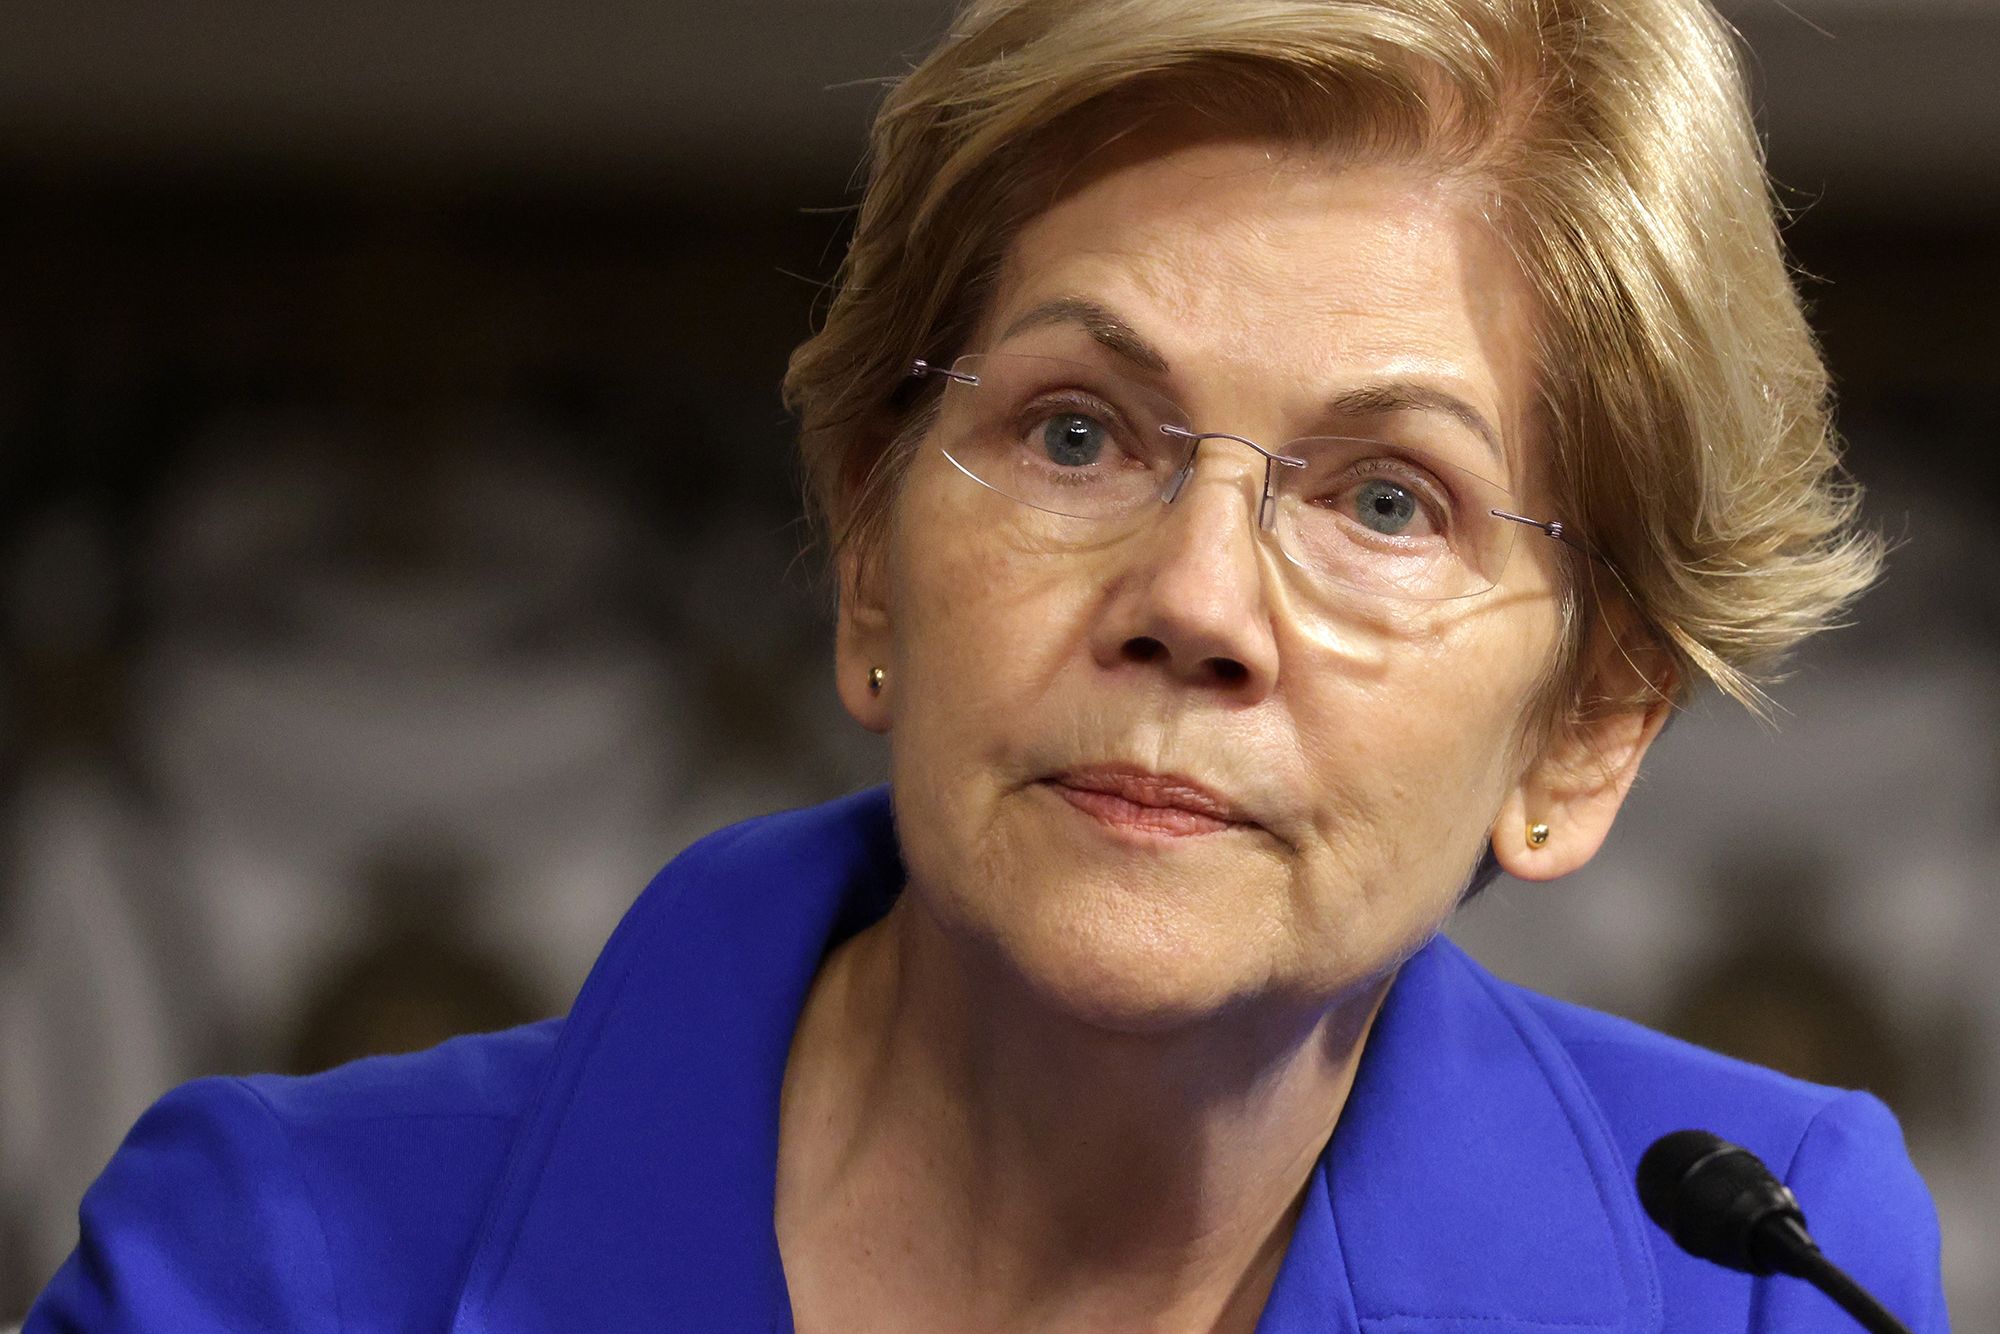 Warren Admits ObamaCare Caused Healthcare Price Hikes